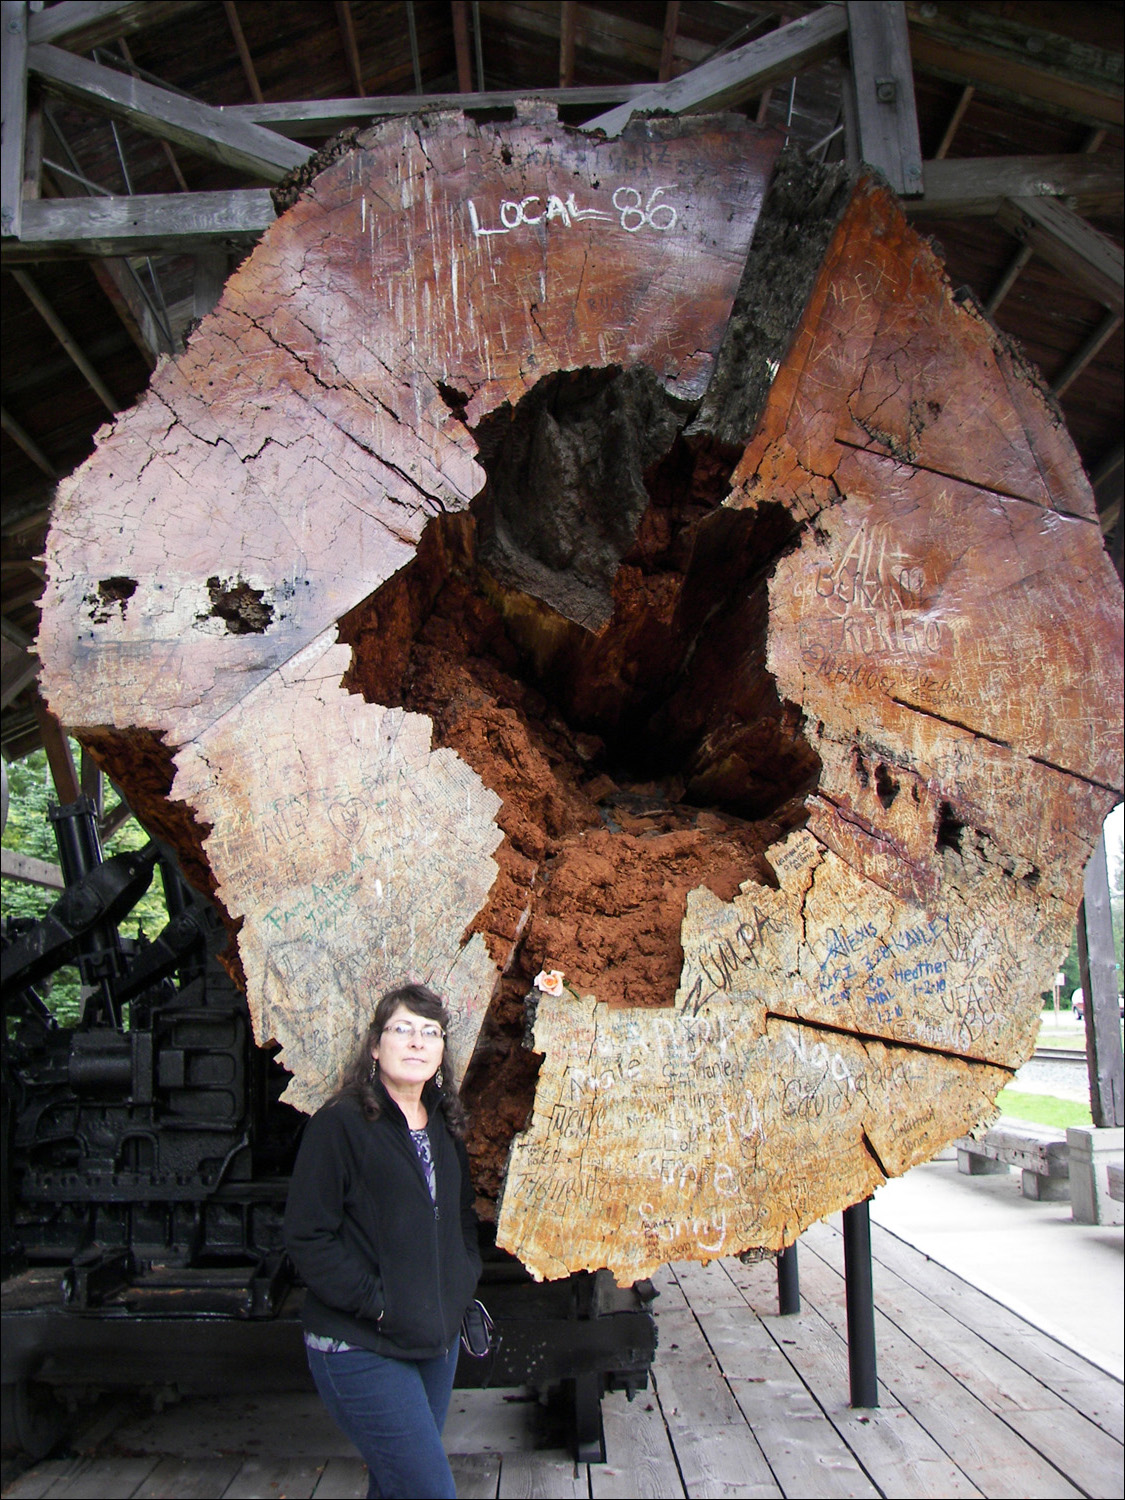 Snoqualmie, WA- Katheriine stands next to large log